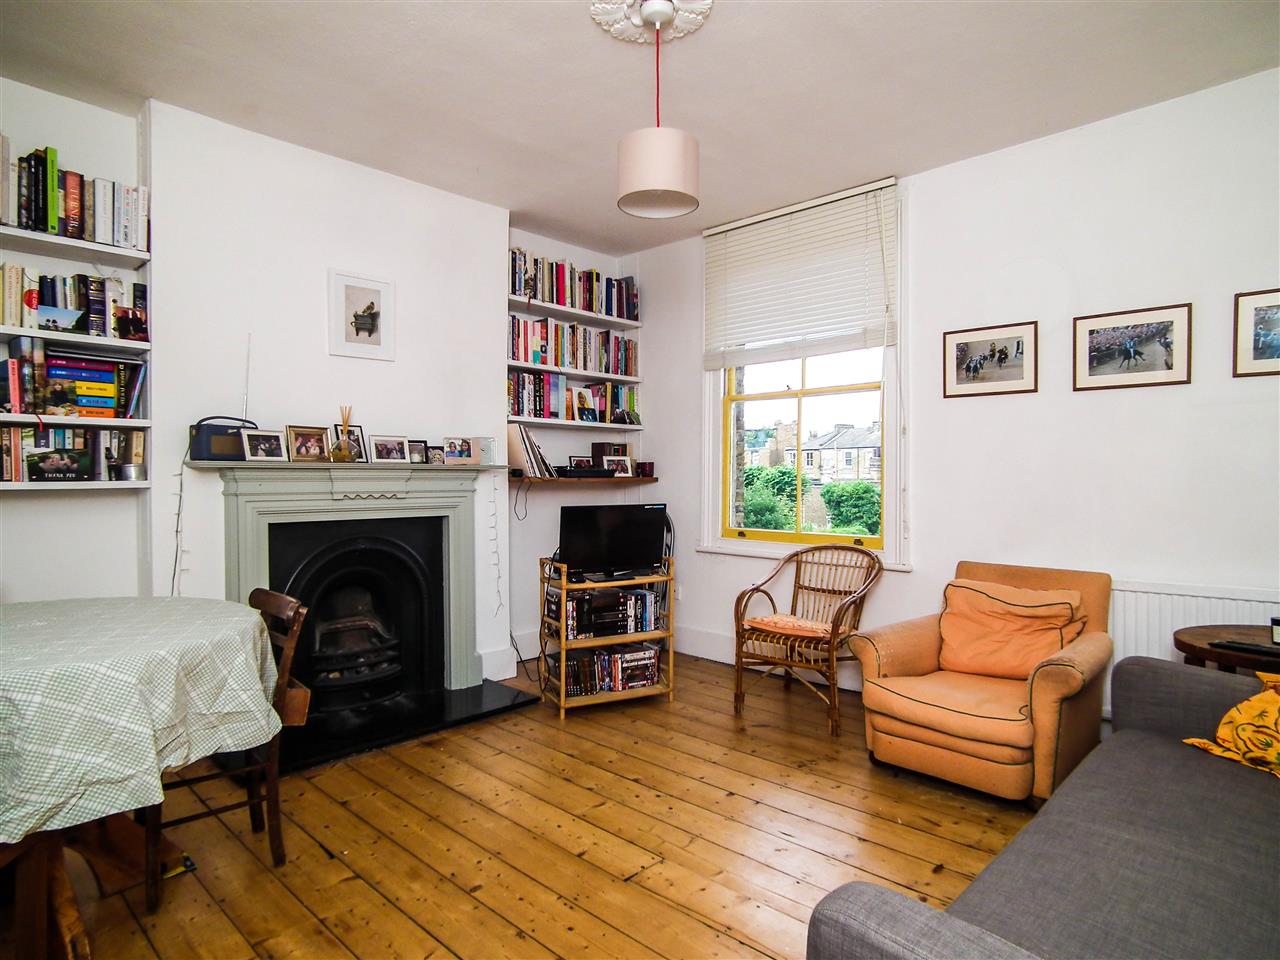 AVAILABLE FROM 22/08/2023. A Spacious (approximately 803 Sq Ft / 75 Sq M) and well presented split level second/top floor PART FURNISHED apartment situated in a highly sought after location within close proximity to the multiple shopping and transport facilities of the Holloway Road together ...